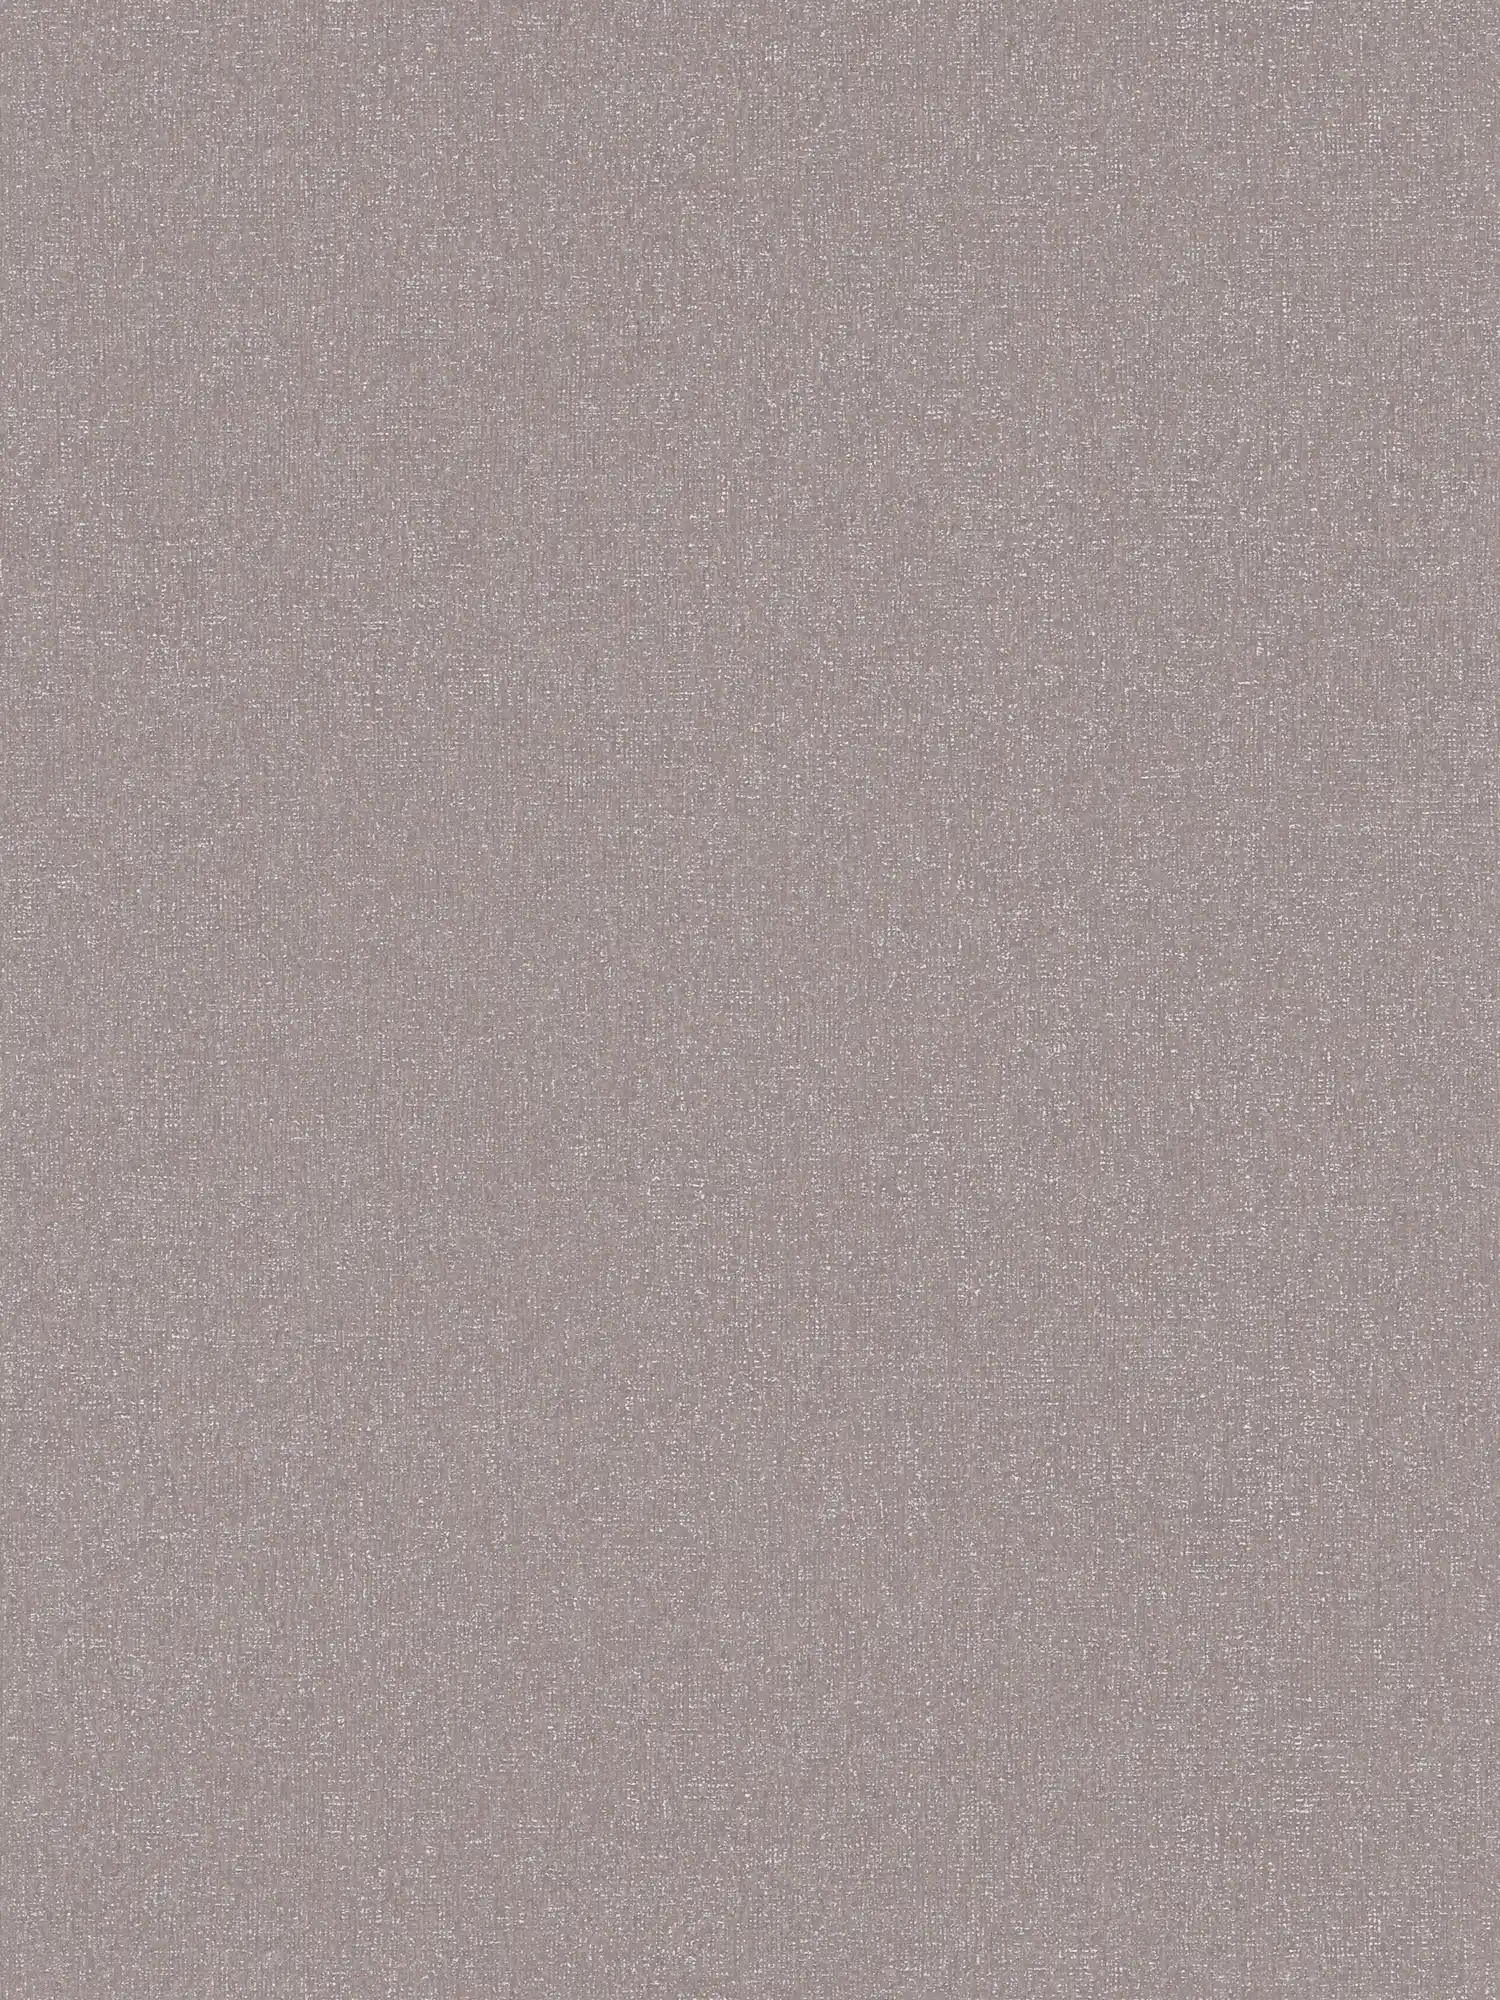 Non-woven wallpaper plains with fine structure - grey, , brown
